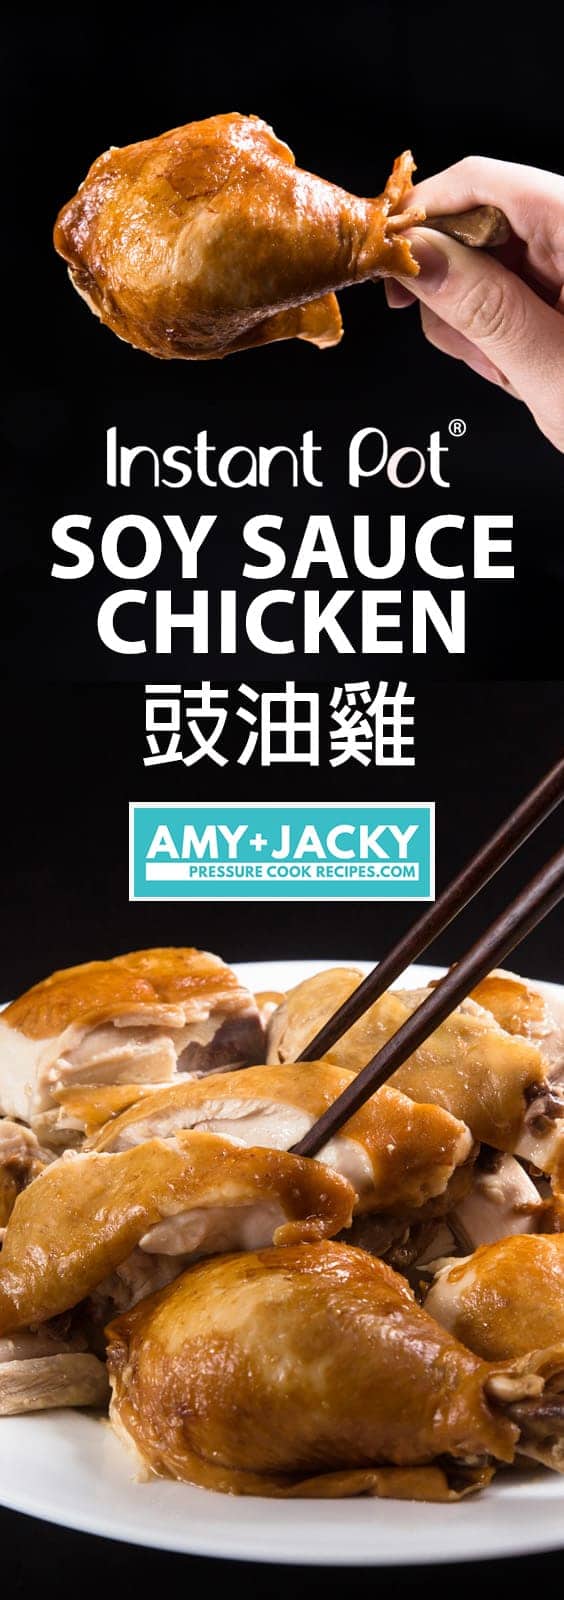 Instant Pot Soy Sauce Chicken Recipe (Pressure Cooker Soy Sauce Chicken 豉油雞, 醬油雞): Make this Classic Soy Sauce Chicken Recipe at home in 3 easy steps! Tender and juicy whole chicken packed with delicious flavors and aroma. #instantpot #instapot #pressurecooker #instantpotrecipes #recipes #chickenrecipes #chineserecipes